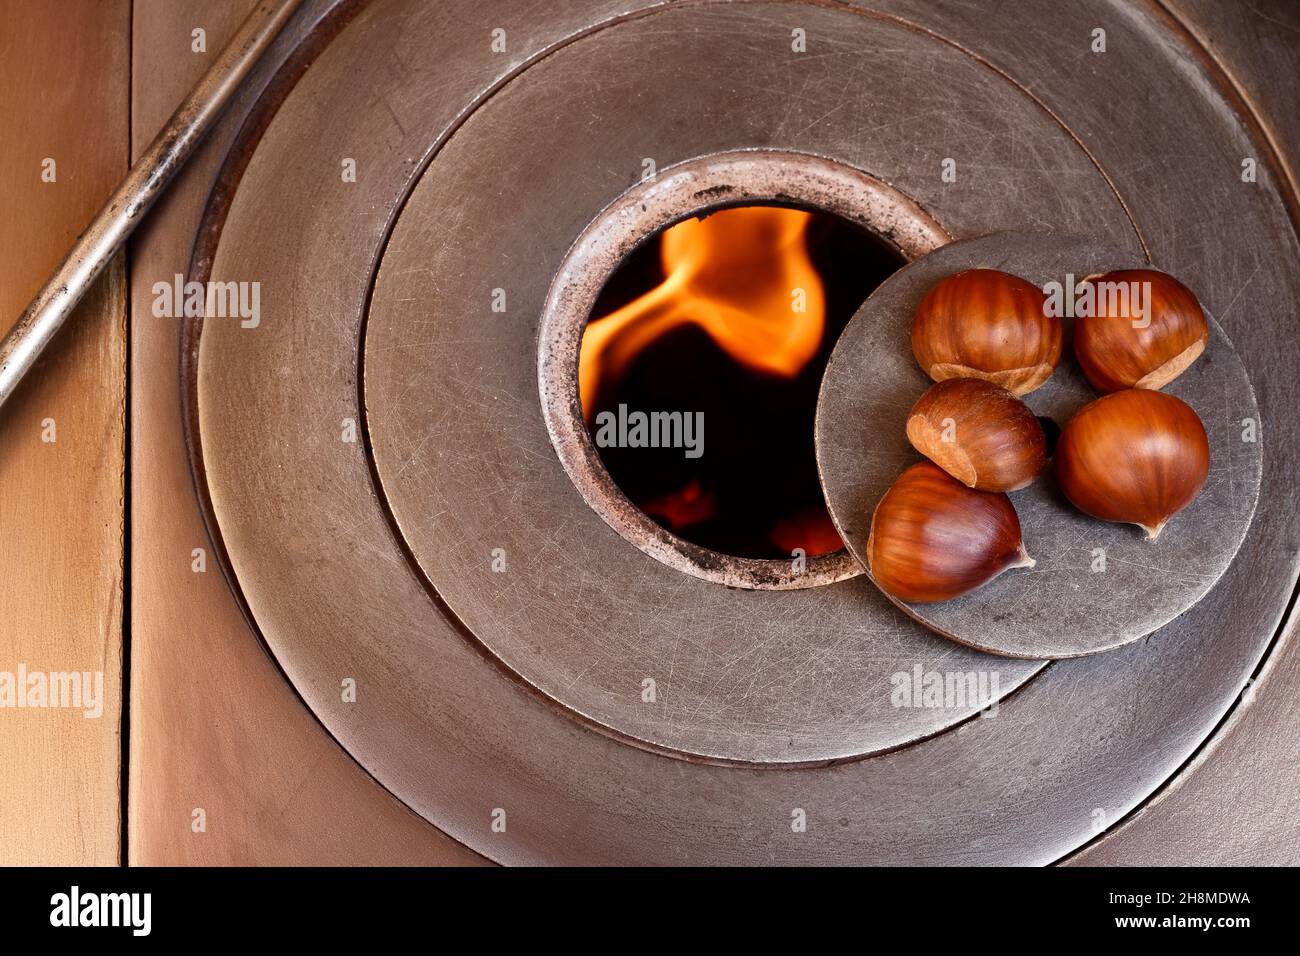 Overhead photograph of some chestnuts over a wood stove fire.The photo has a vintage style and is taken in horizontal format. Stock Photo